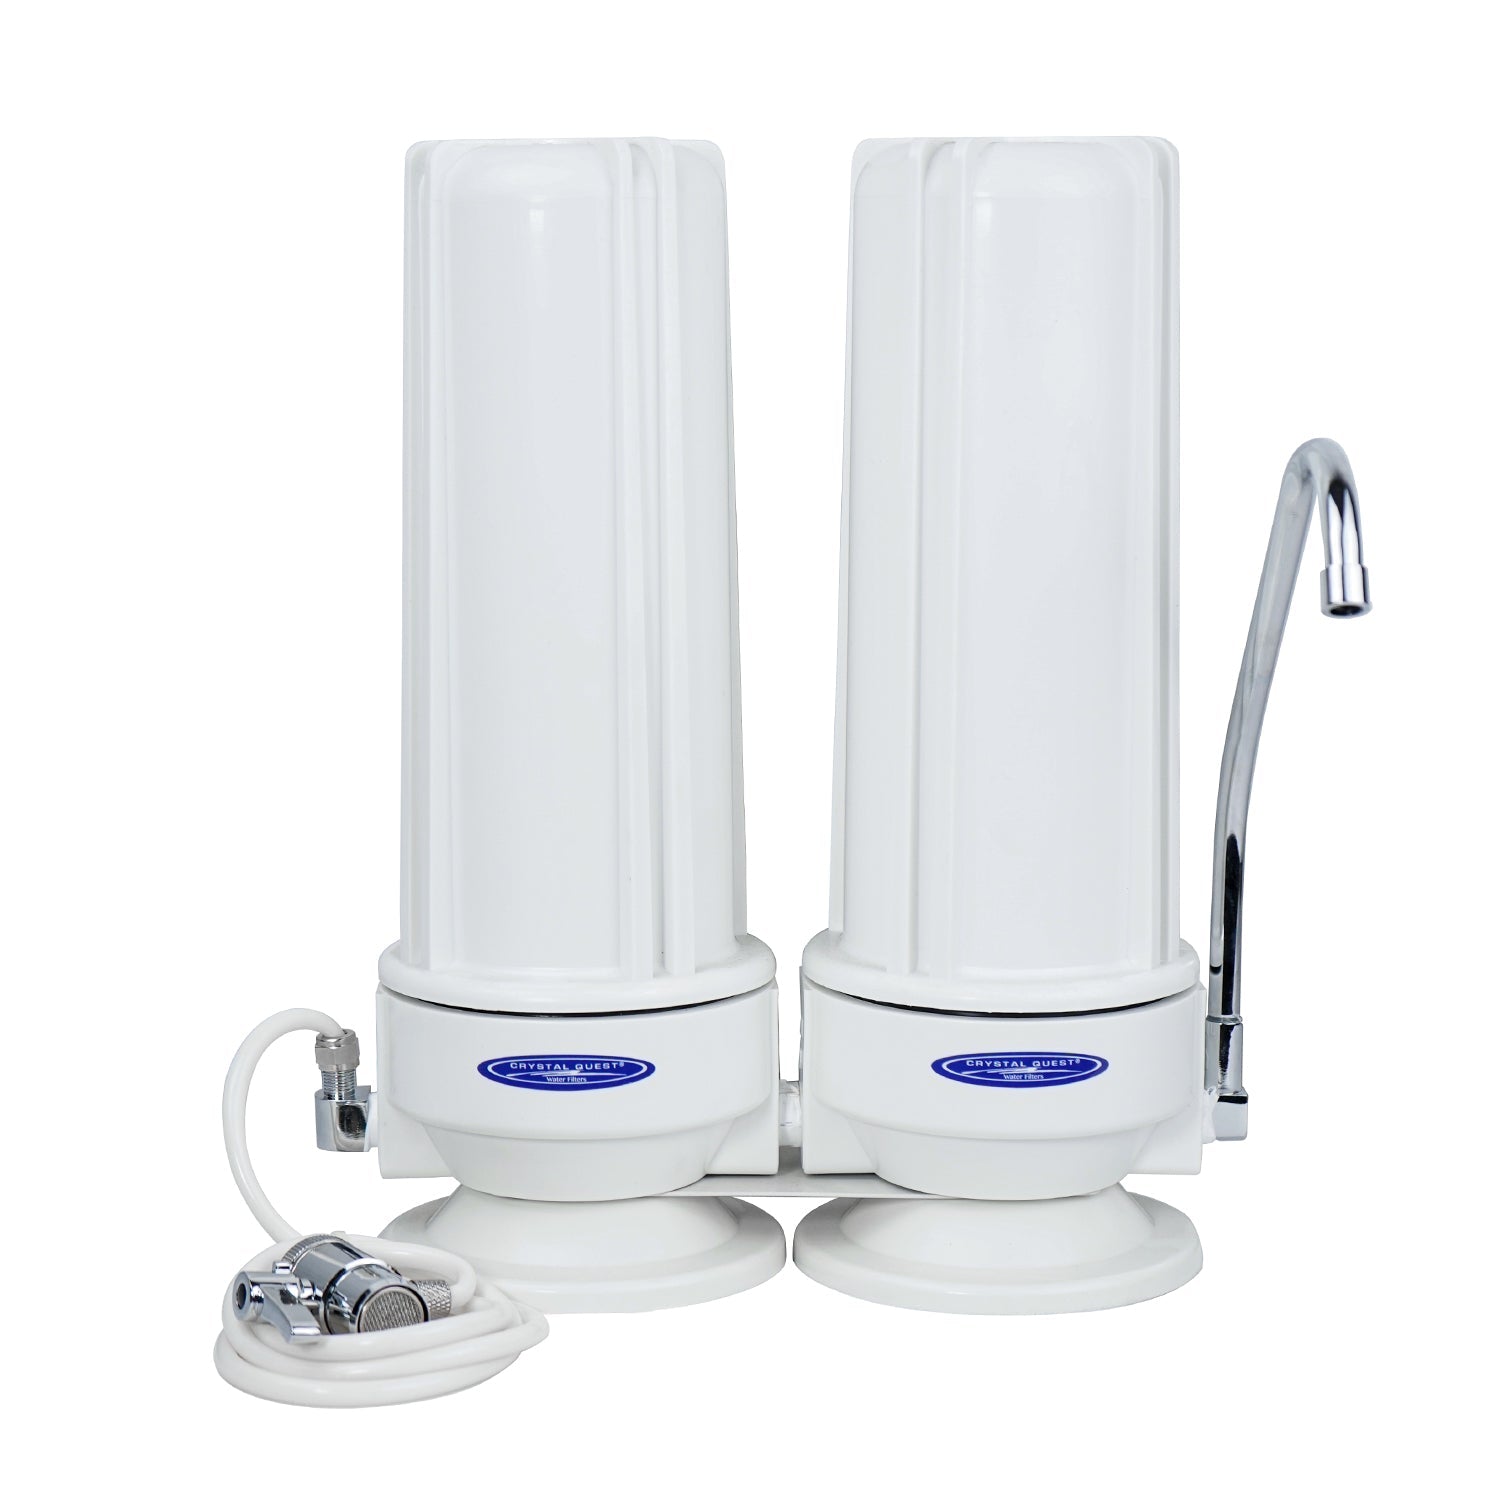 Crystal Quest Lead Countertop Water Filter System Double Polypropylene